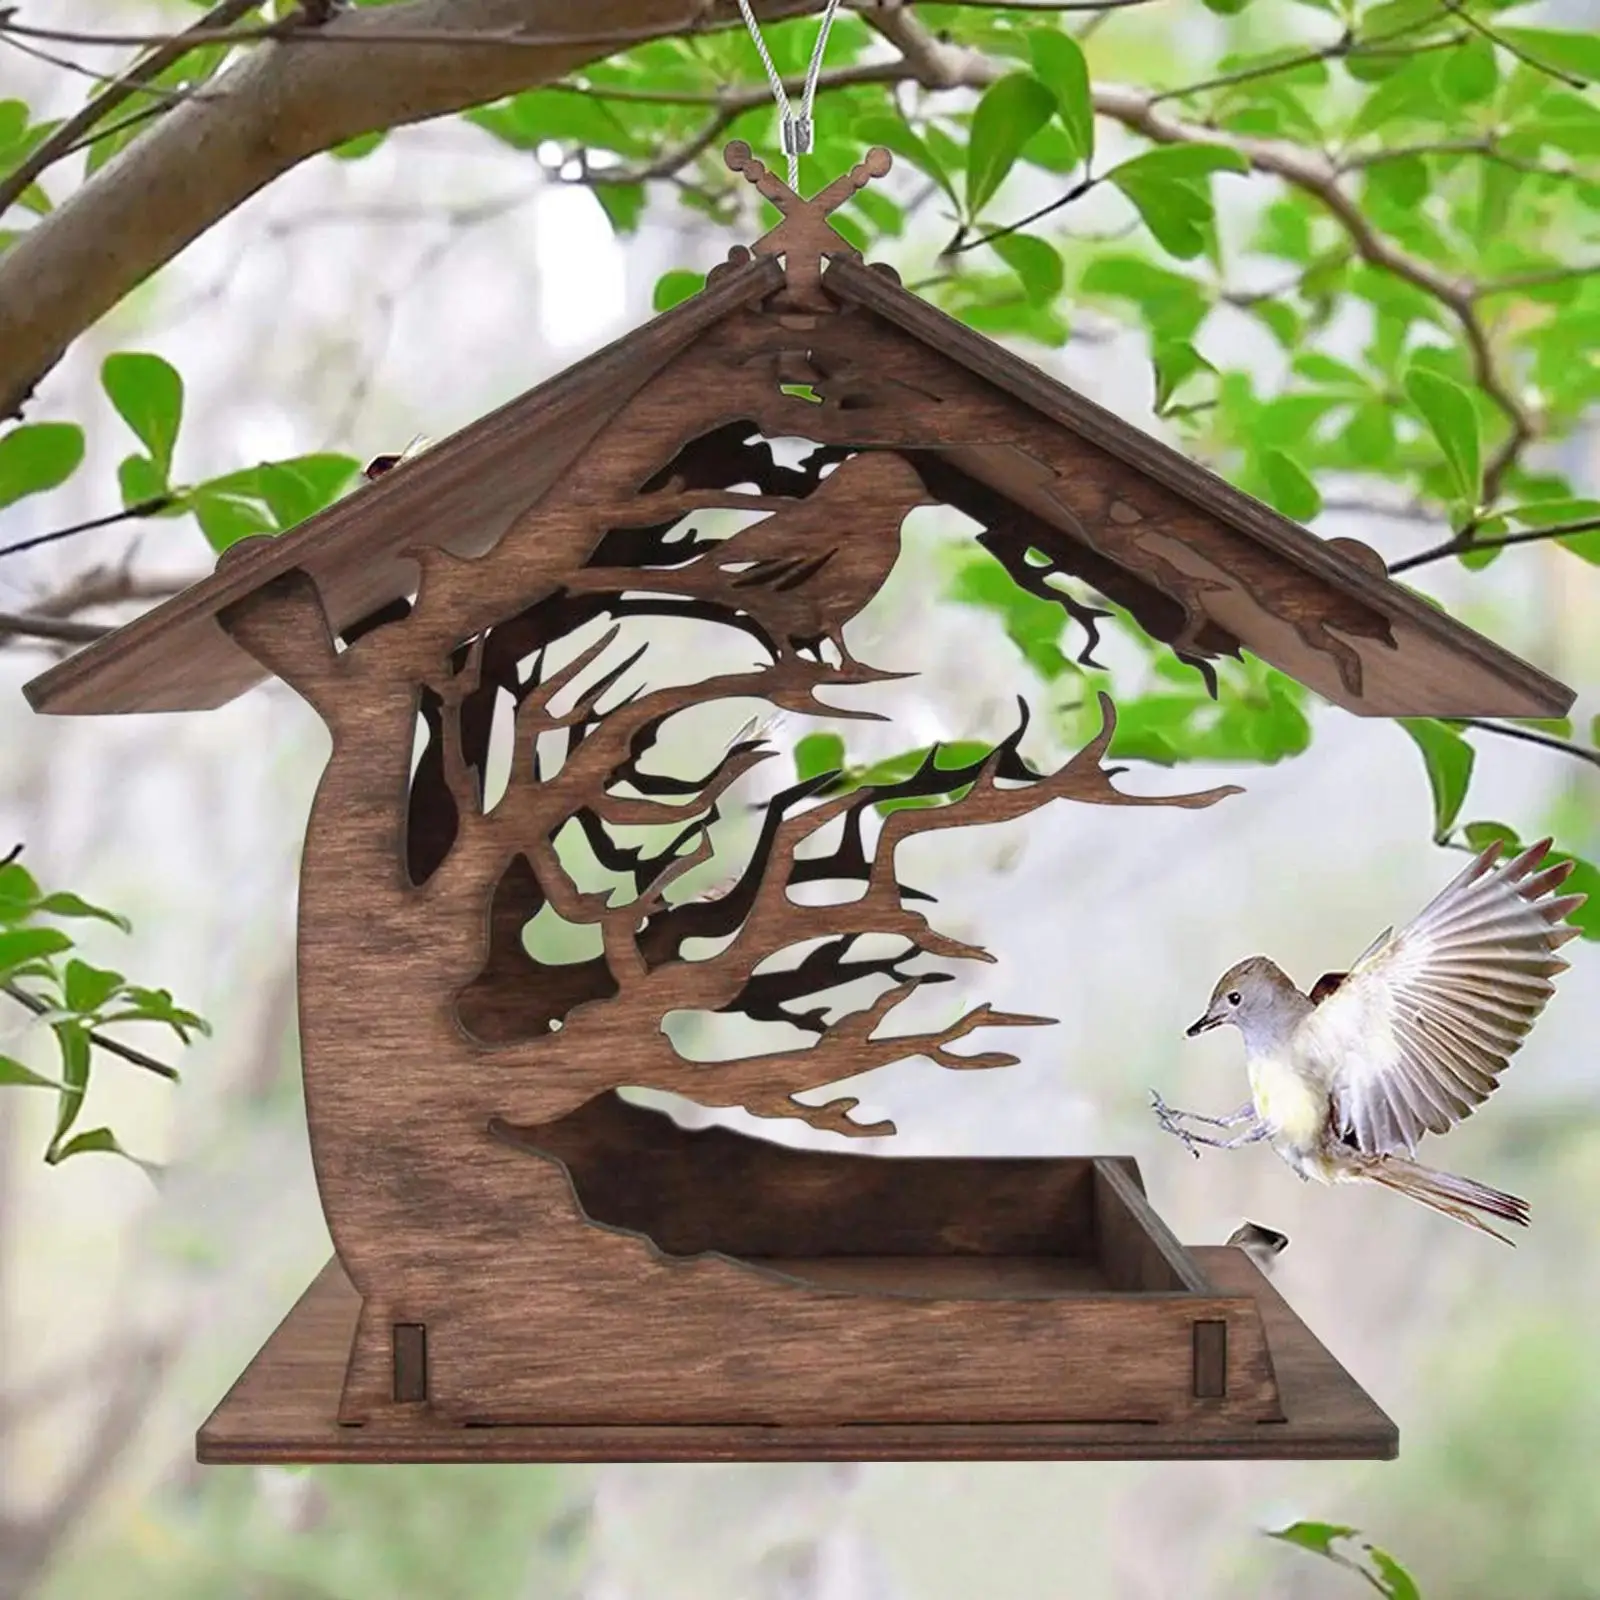  Feeder Attractive Hanging Birdhouse Outdoor Ranch Tree Decoration Ornaments Gifts